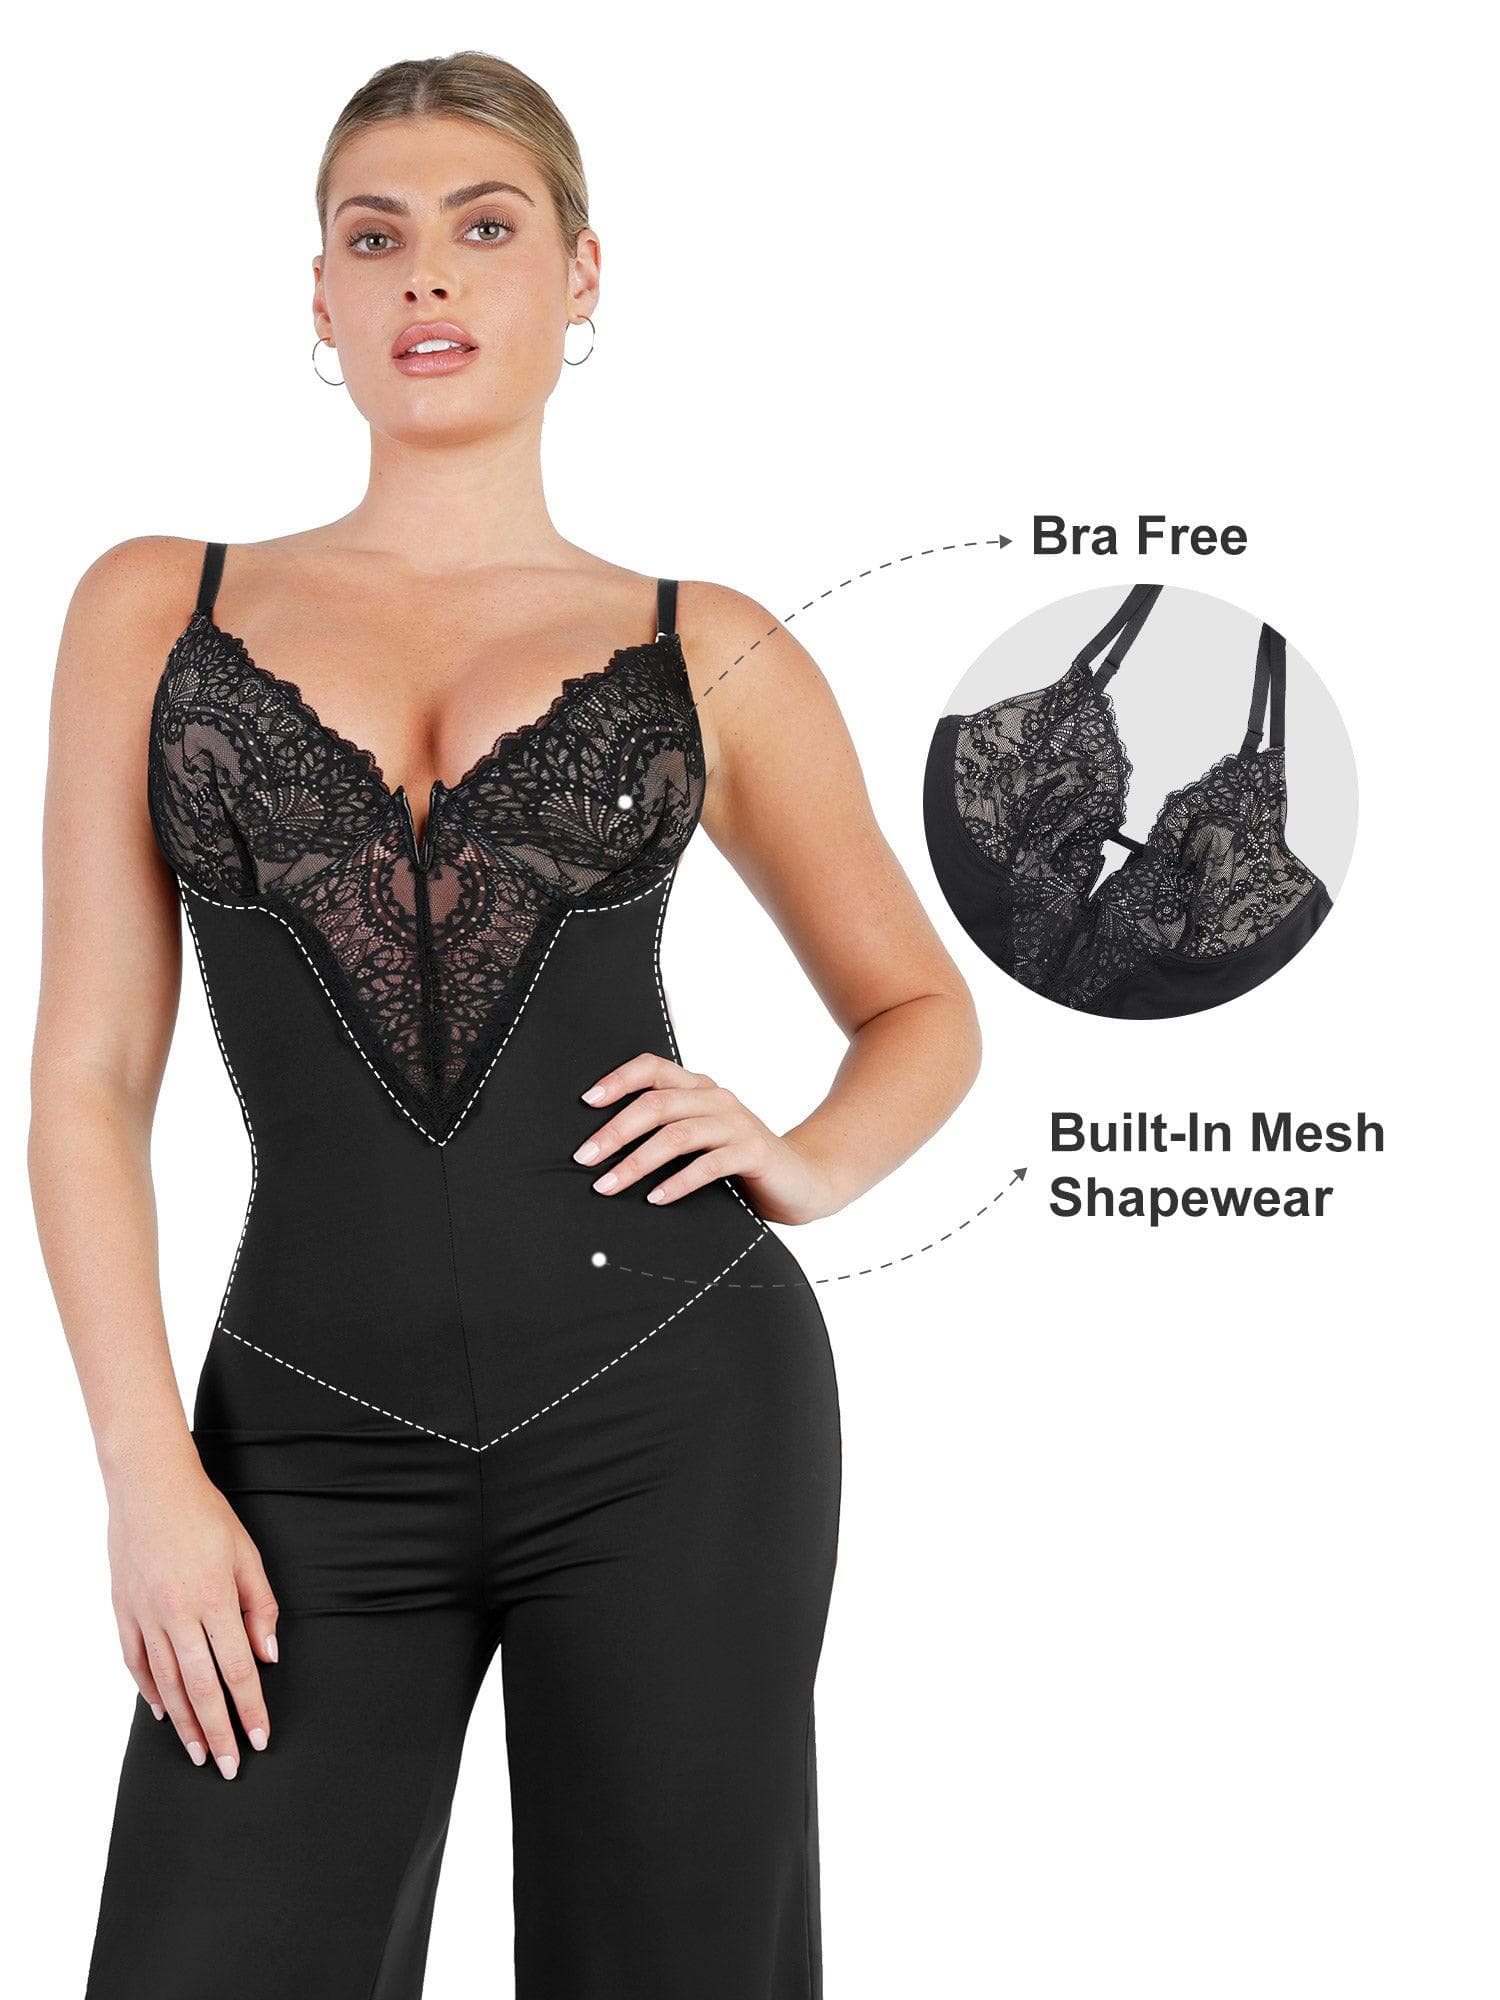 Snatched and supoorted 😍 your must have #popilush Lace Deep-V shapin